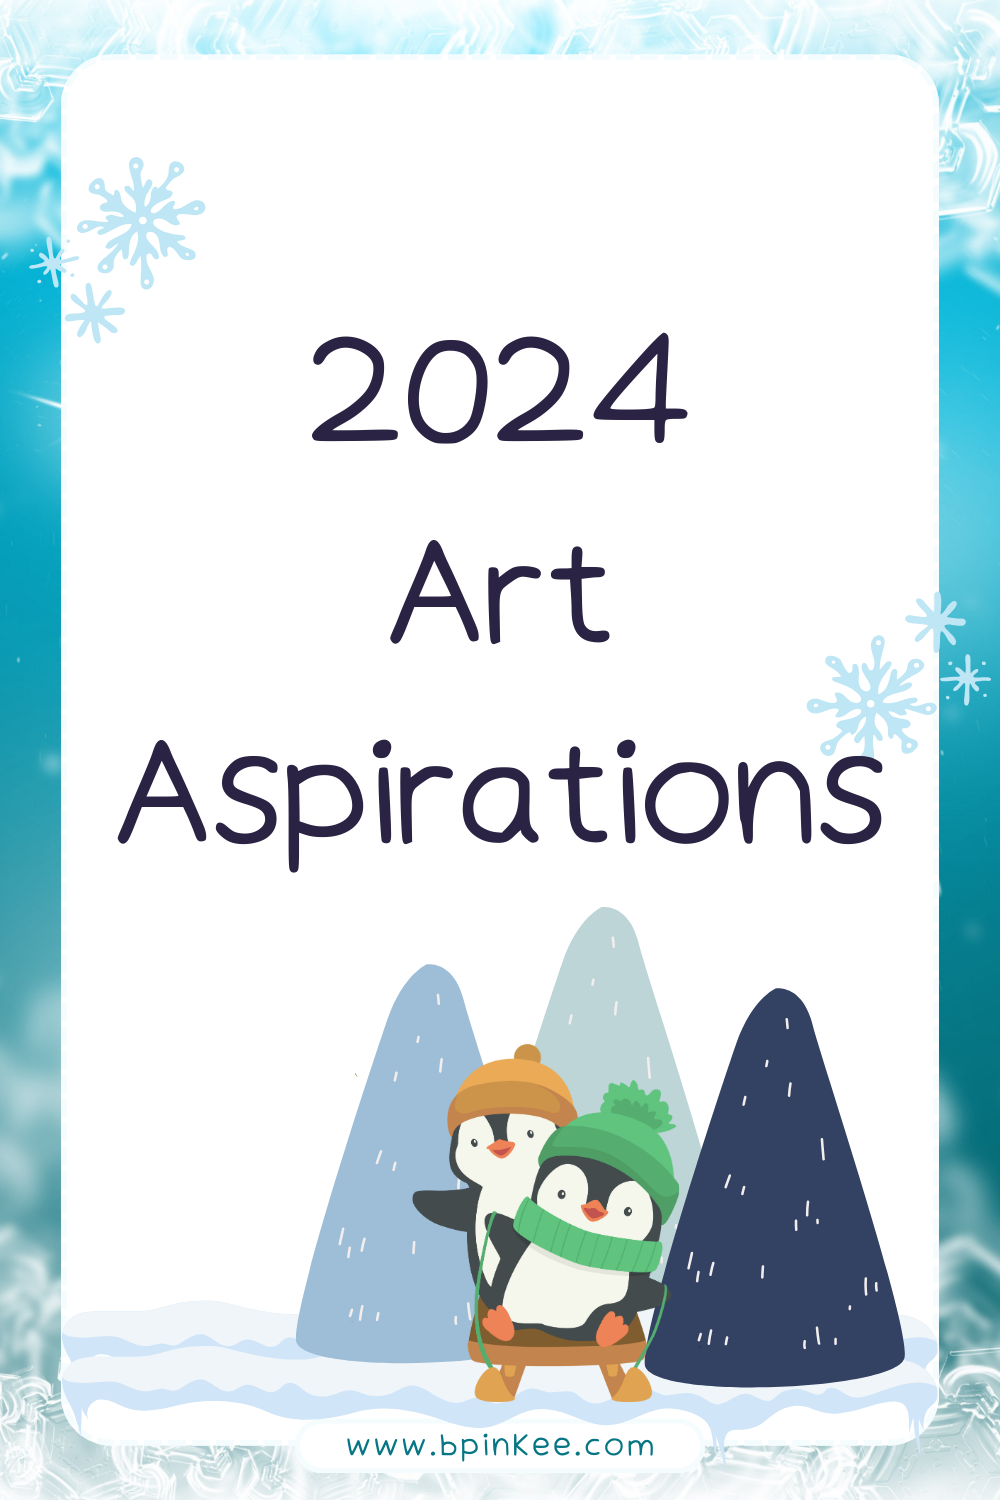 My Art Aspirations for 2024